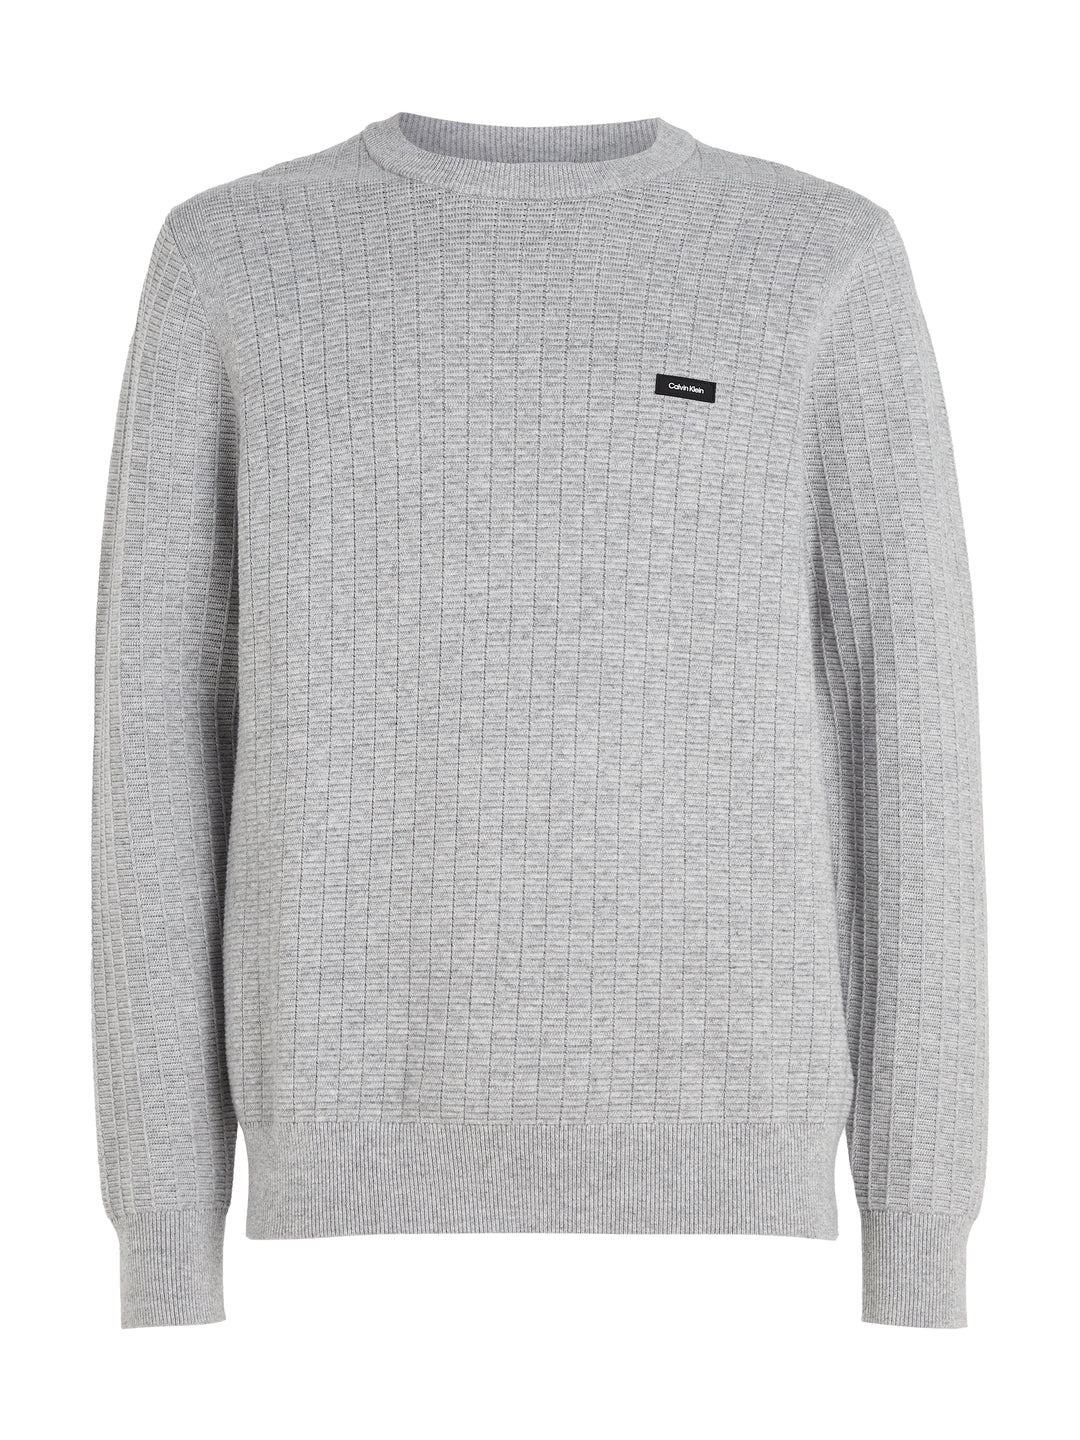 CK STRUCTURE SWEATER - MID GREY HEATHER